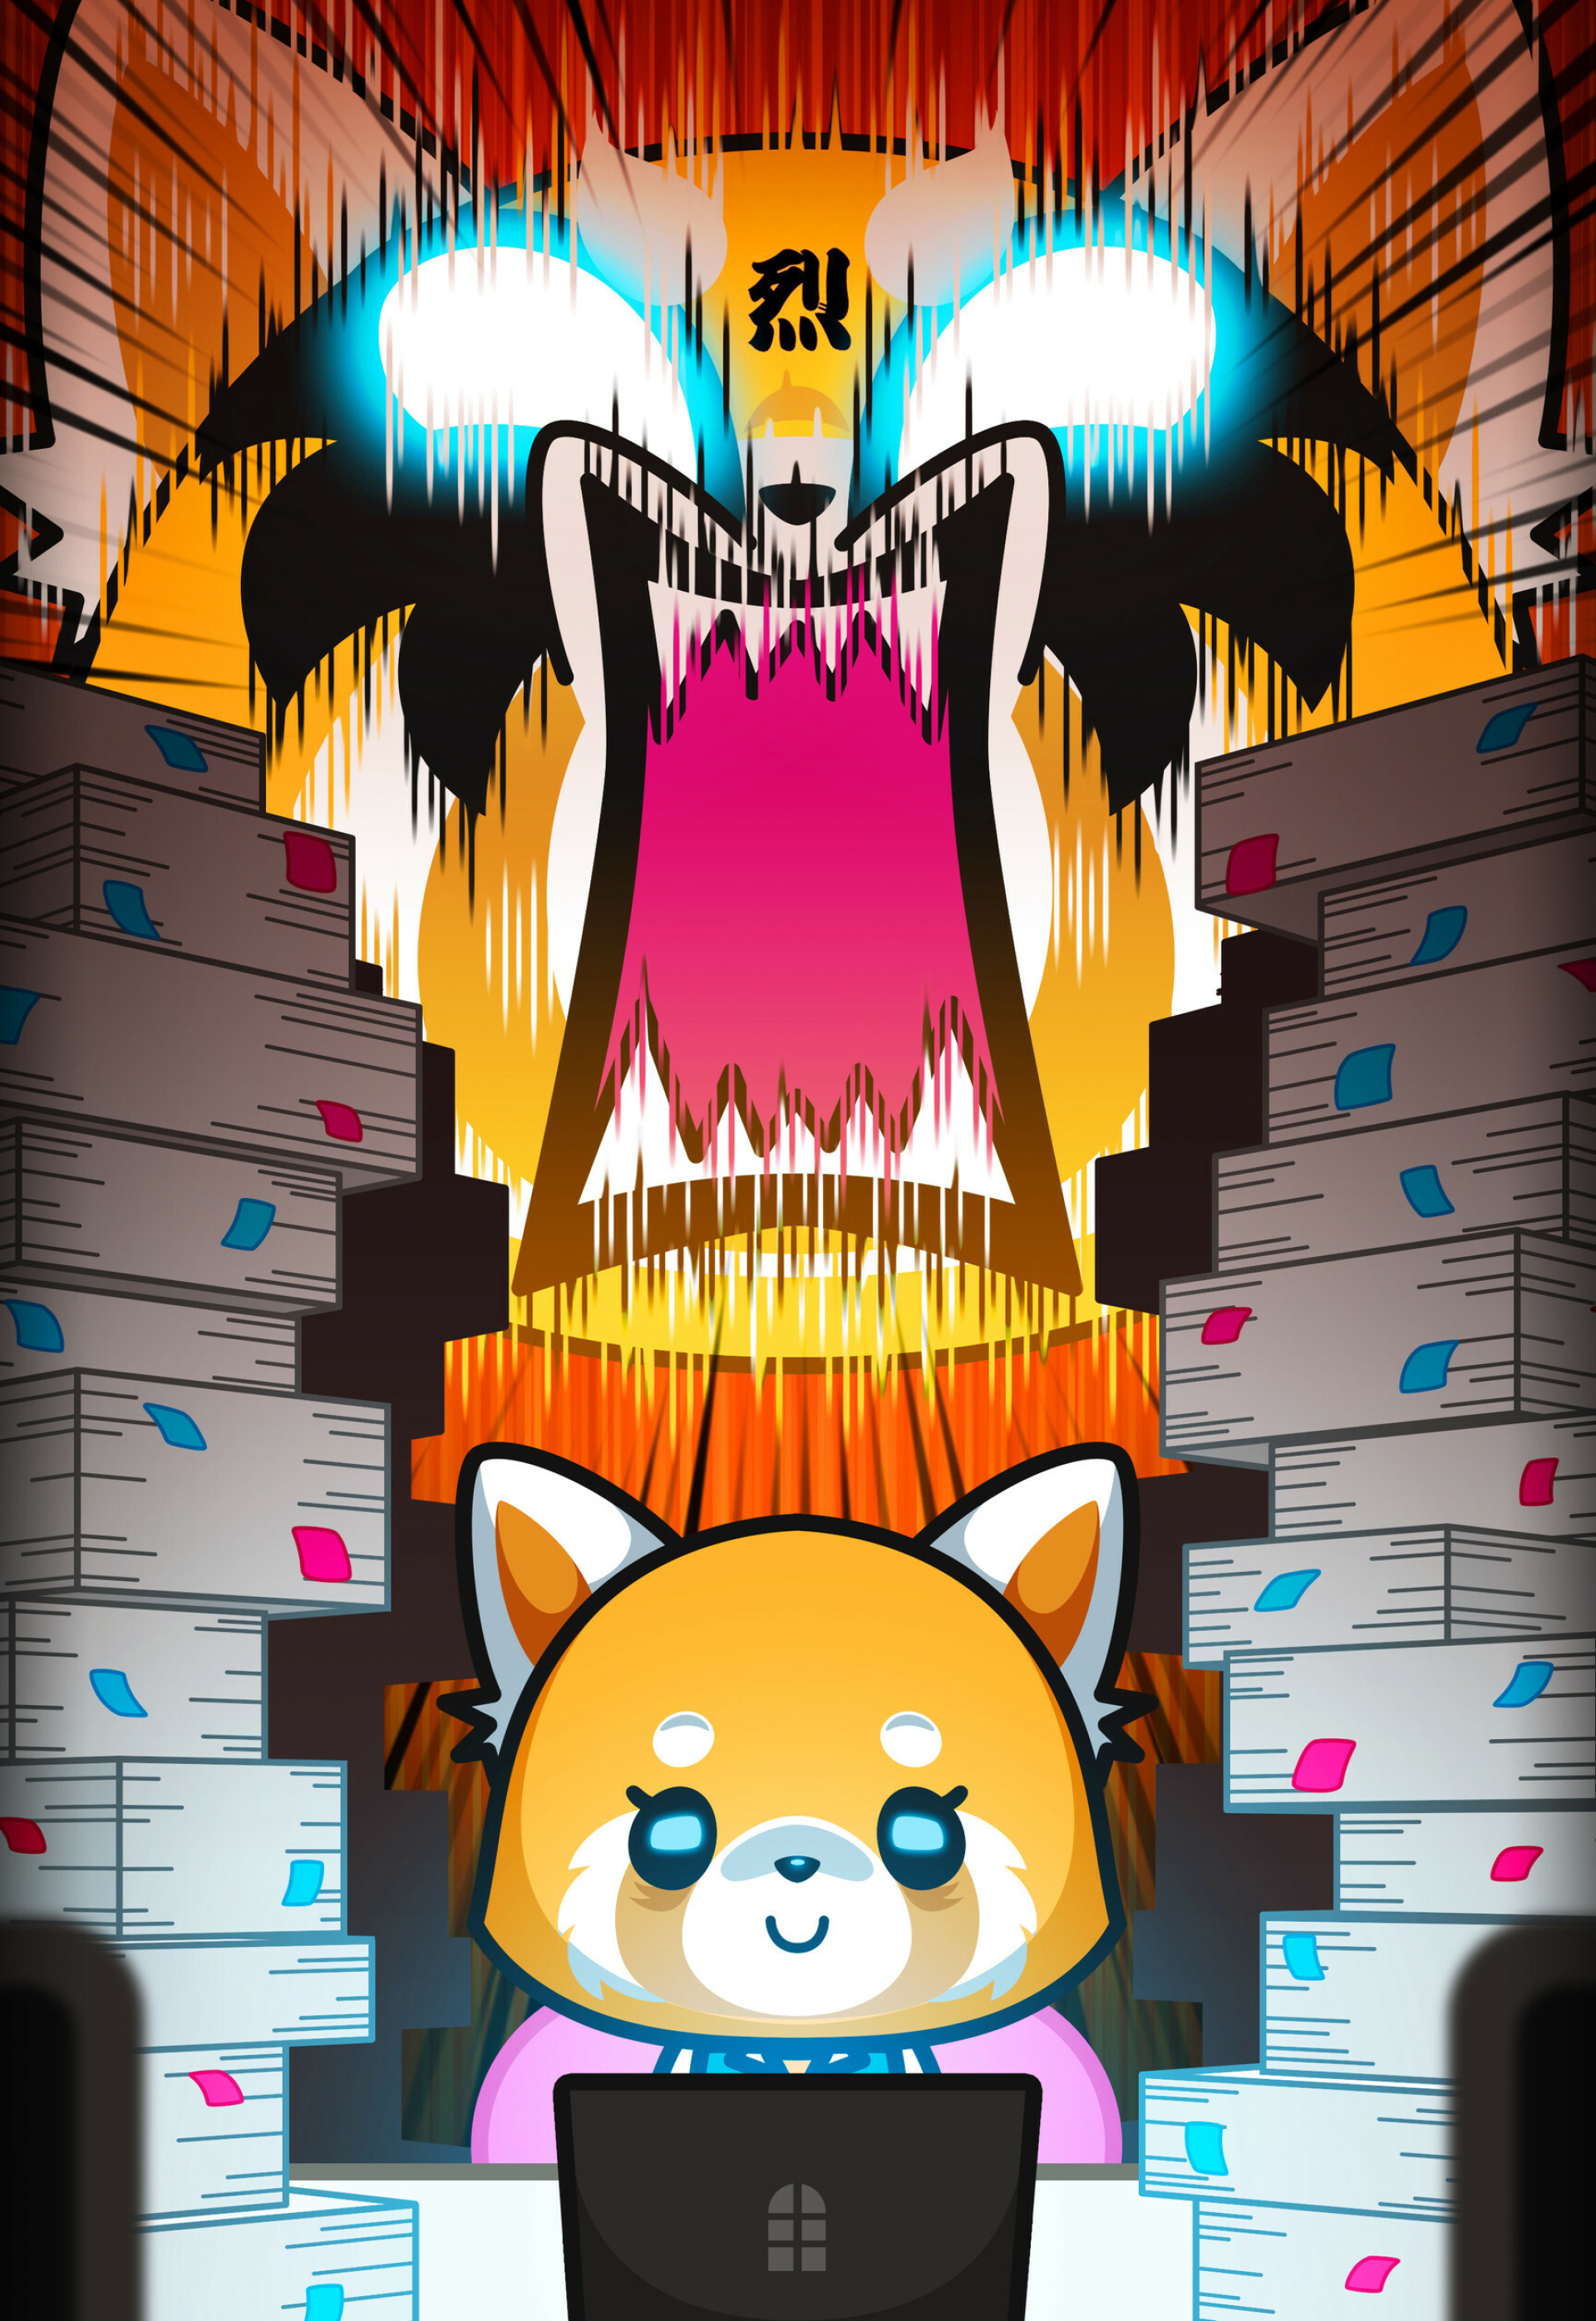 Aggretsuko: A Japanese animated comedy streaming television series. 1920x2800 HD Wallpaper.